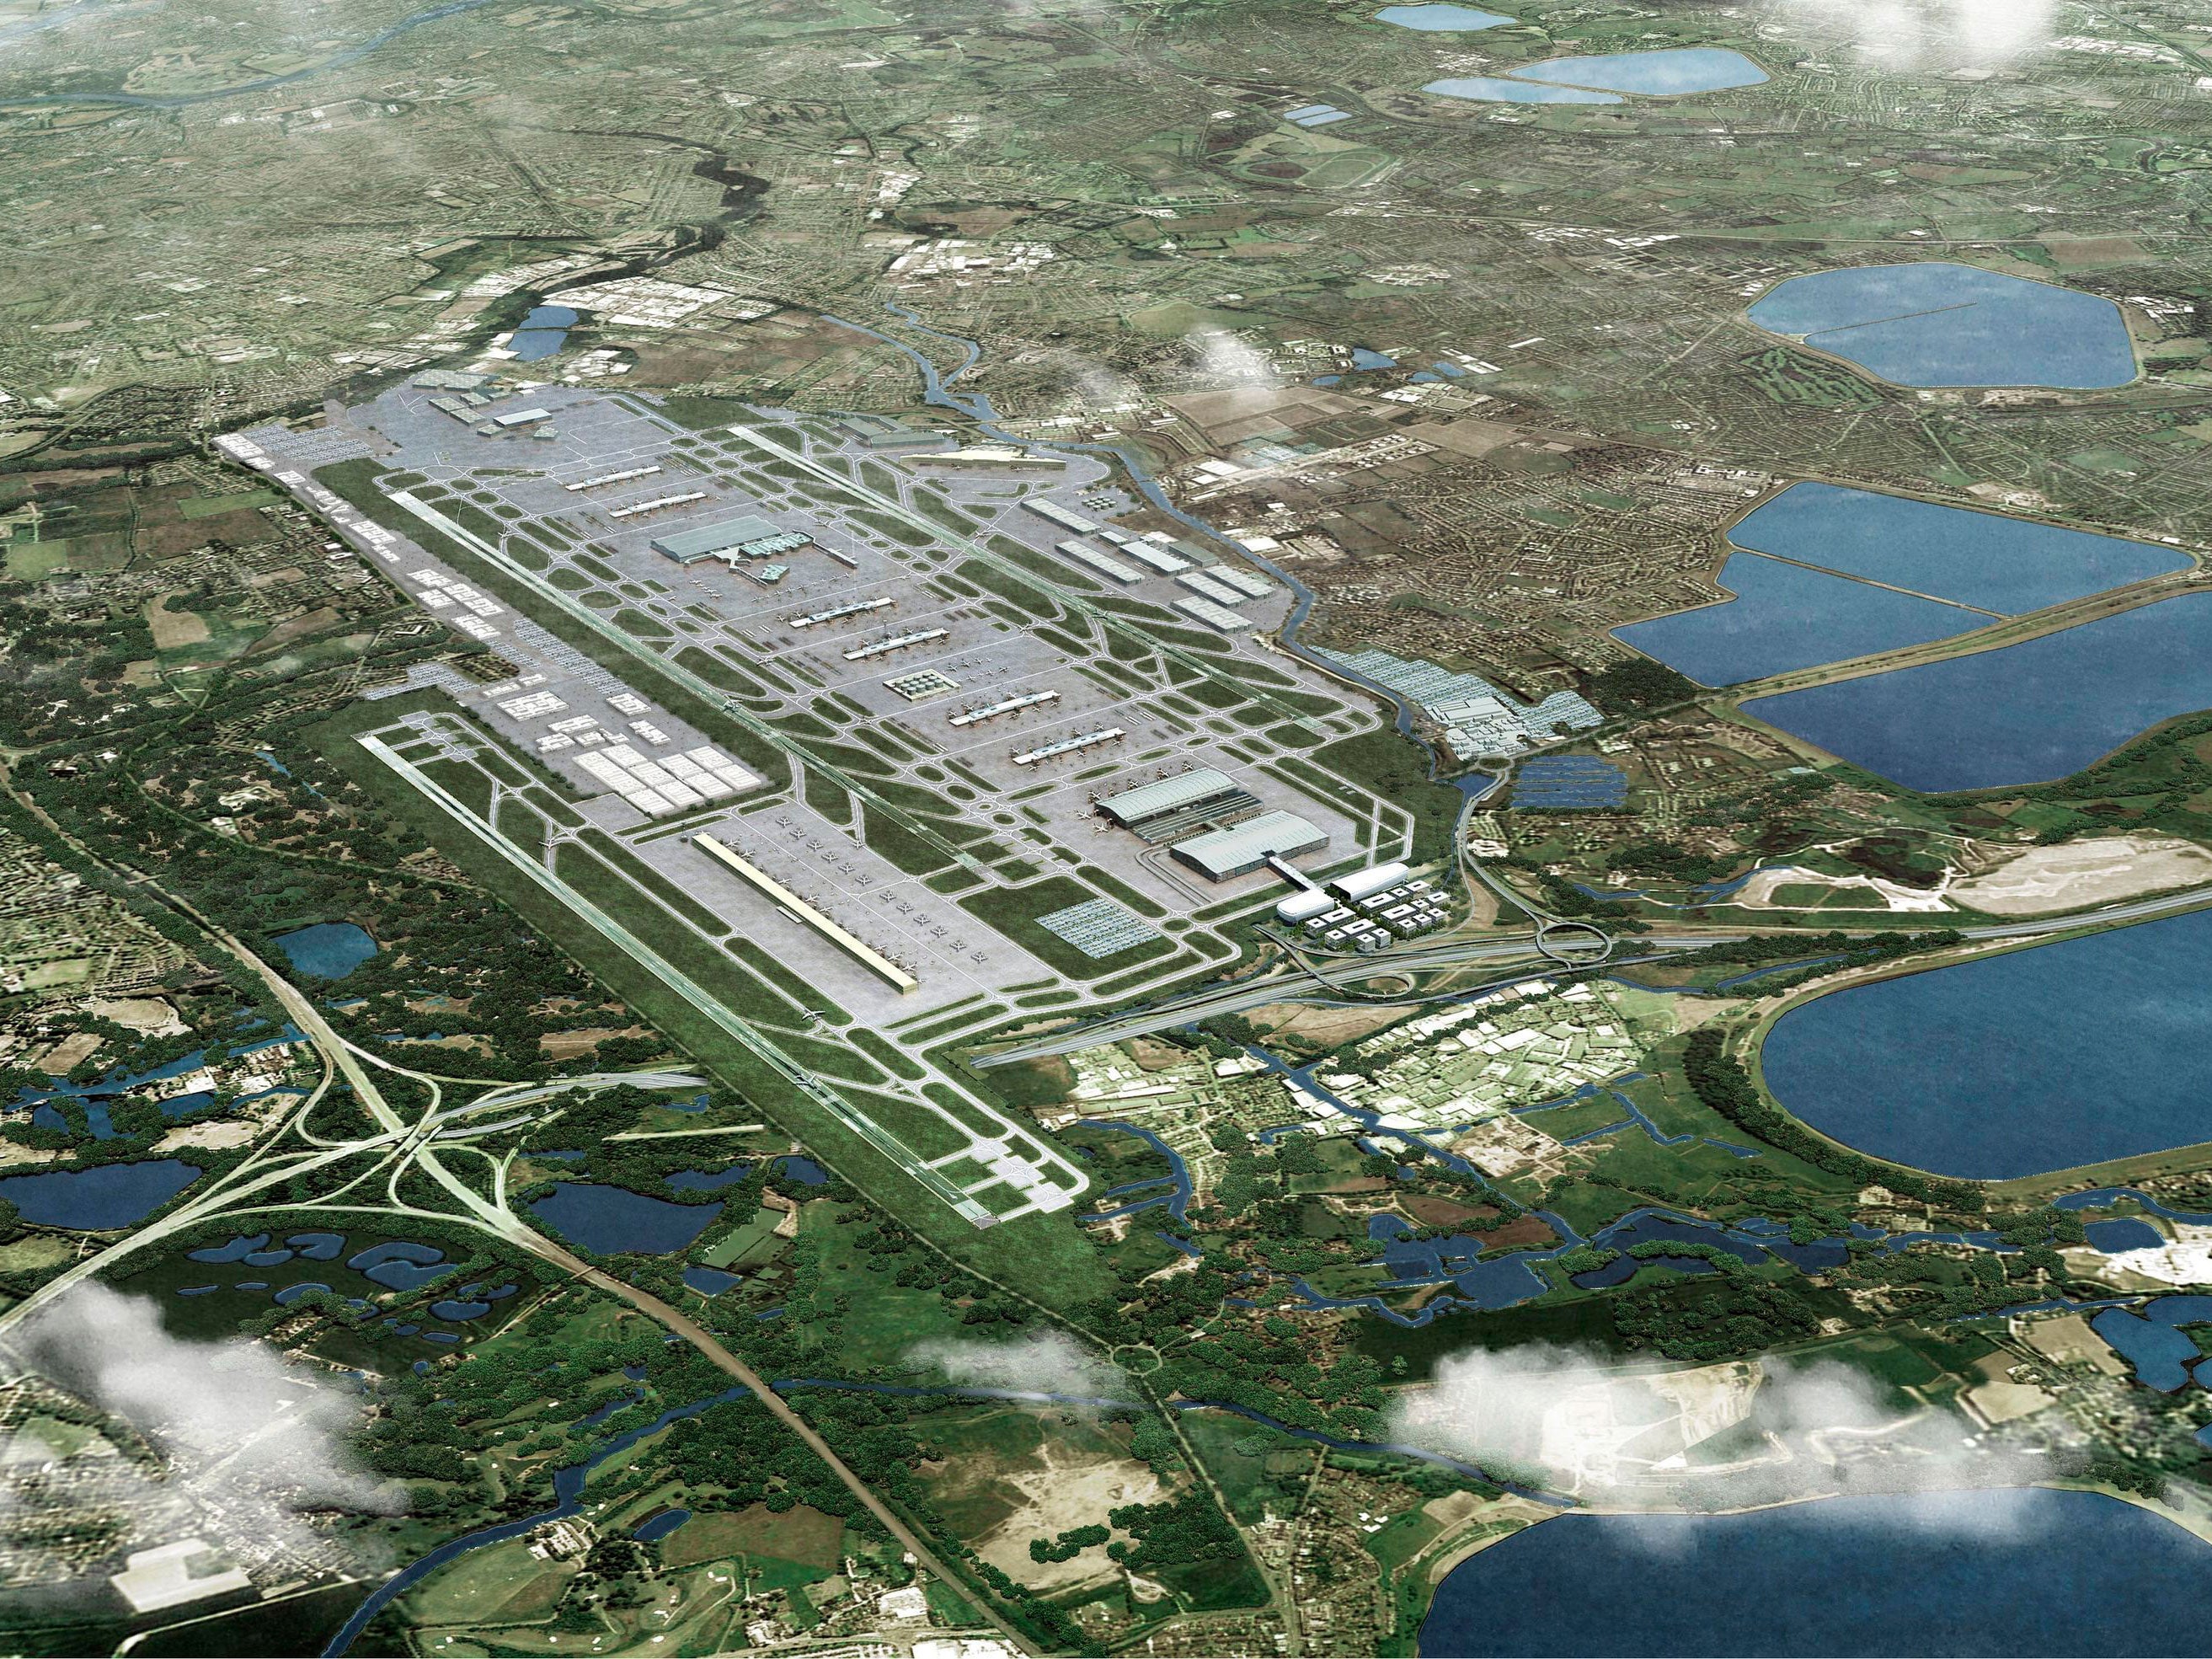 Aerial view of planned third runway at Heathrow